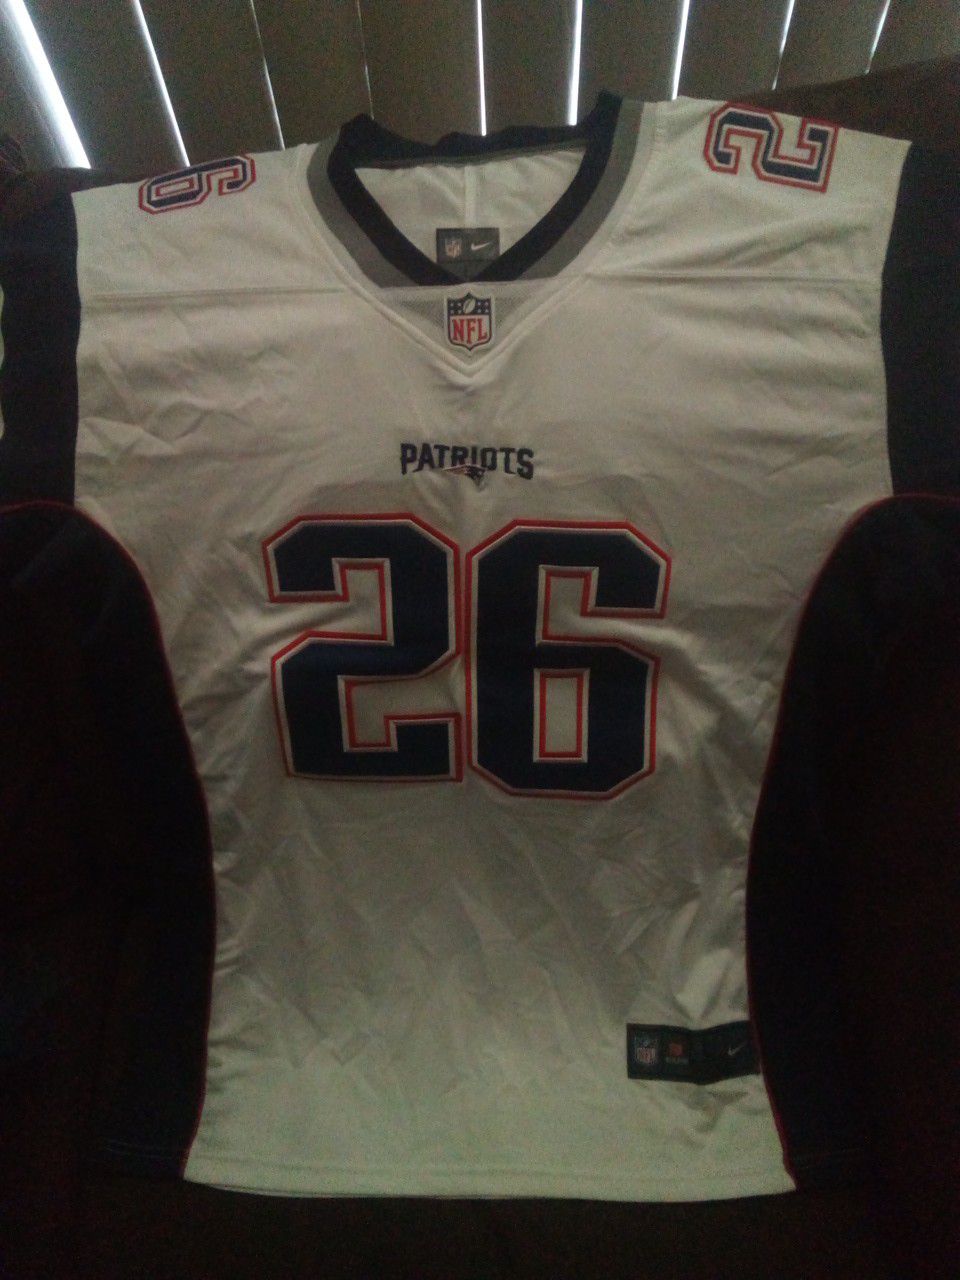 New England Patriots jersey size large